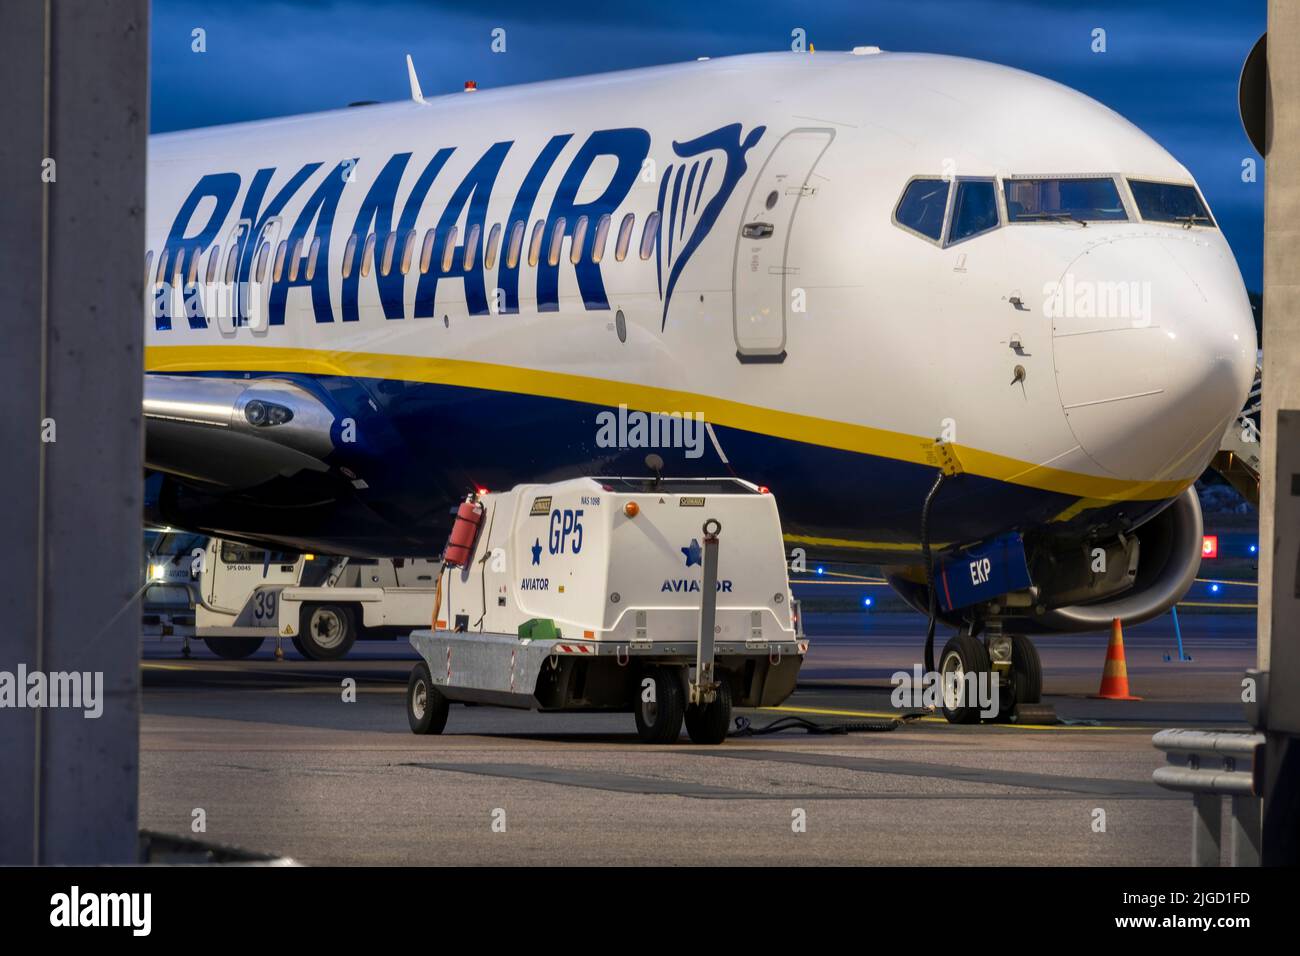 Helsinki / Finland - JULY 9, 2022: A Boeing 737, operated by Ryanair, parked at the Helsinki Airport apron Stock Photo